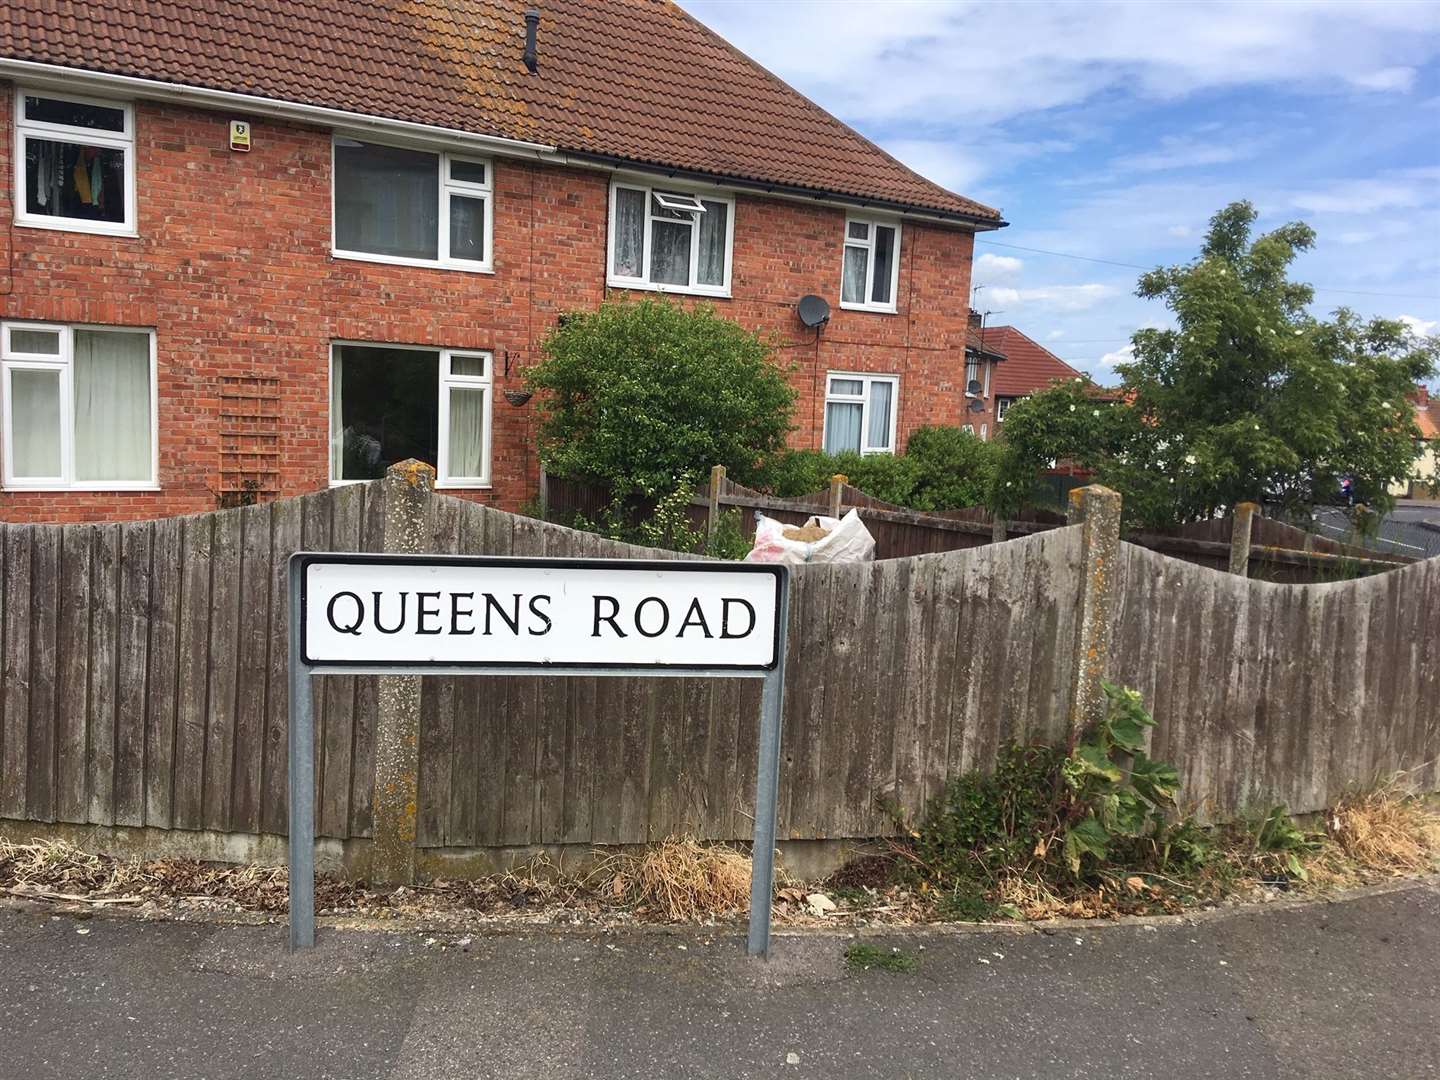 The accident took place in Queens Road (11389607)